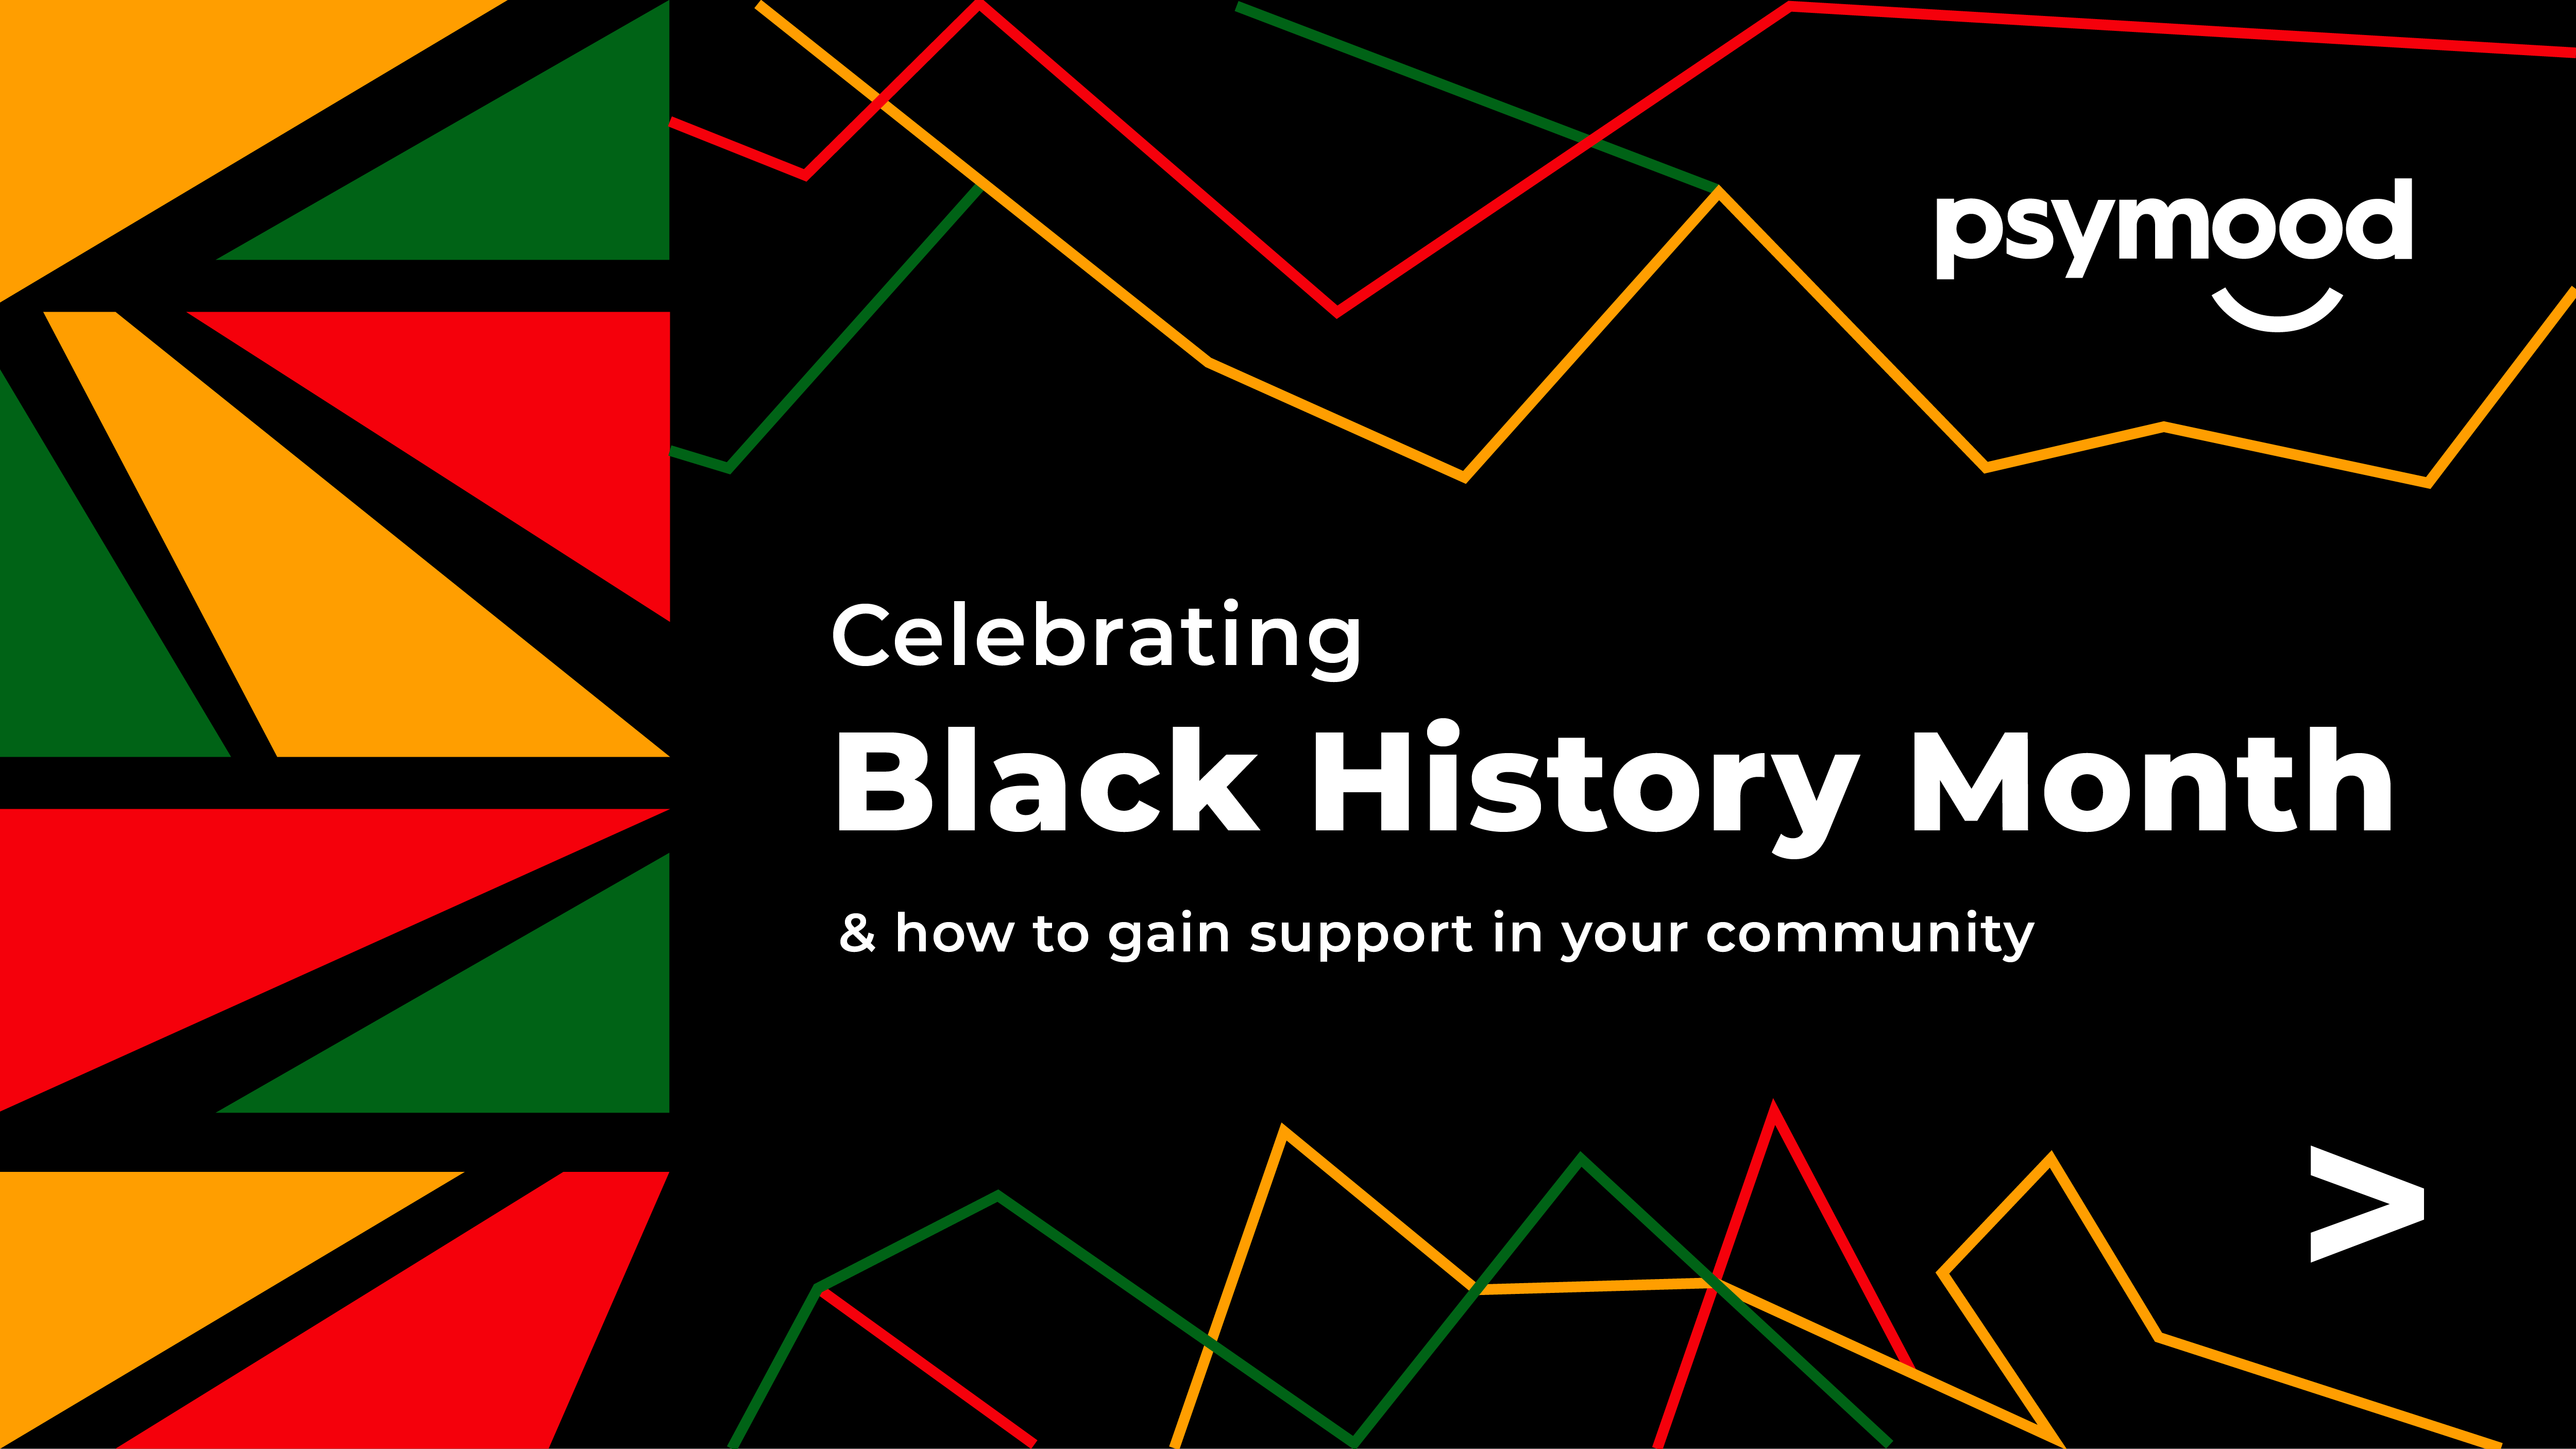 Celebrating Black History Month and How You Can Gain Support From Your Community